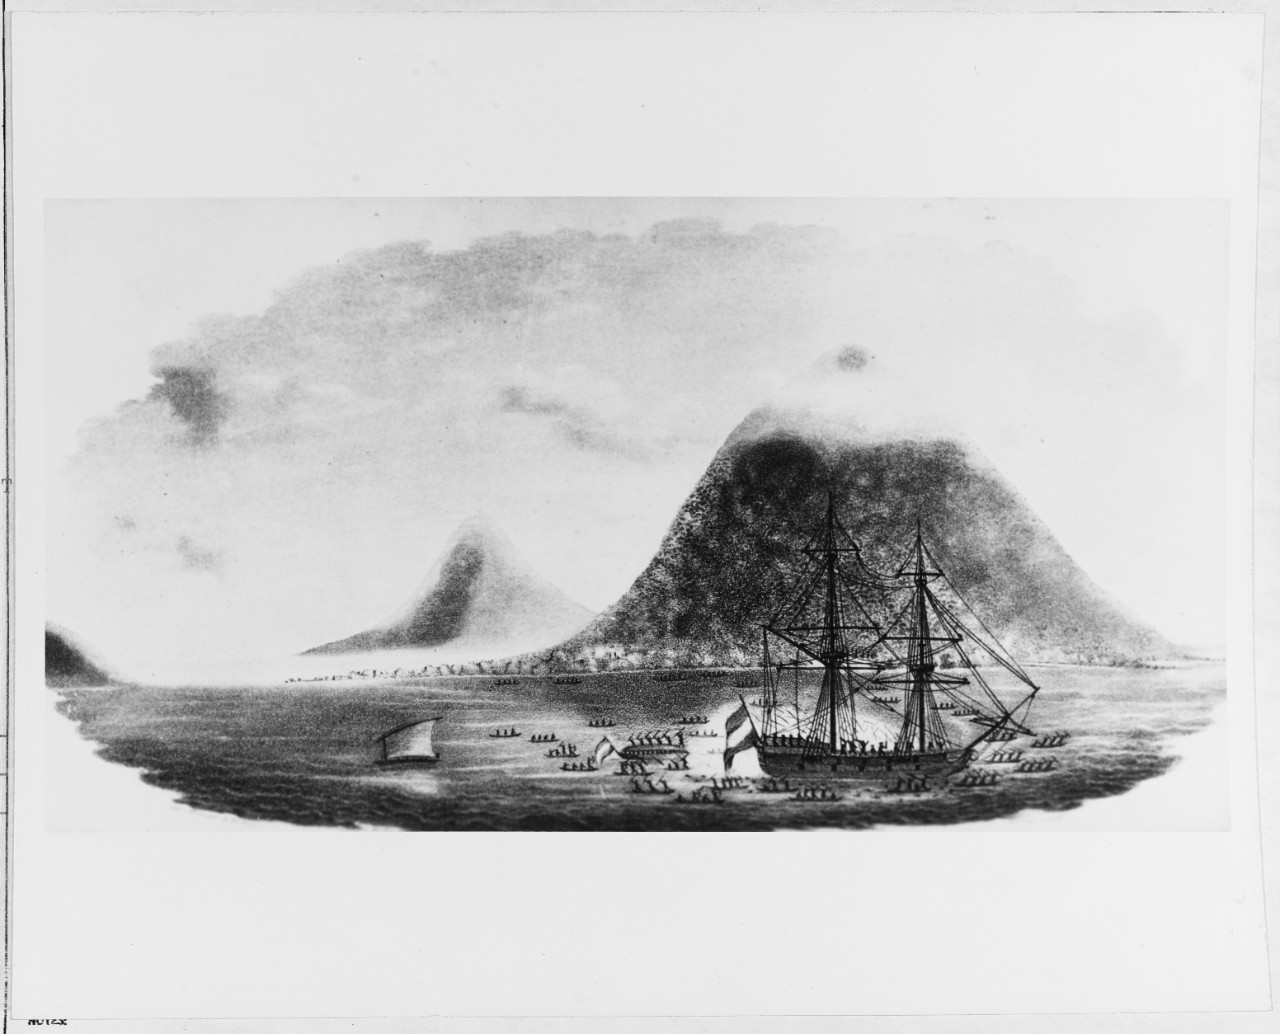 Incident off Mindanao, 1790:  "Engagement between the crew of the WAAKSAMKEYD transport, and the natives of an island near Mindanao."